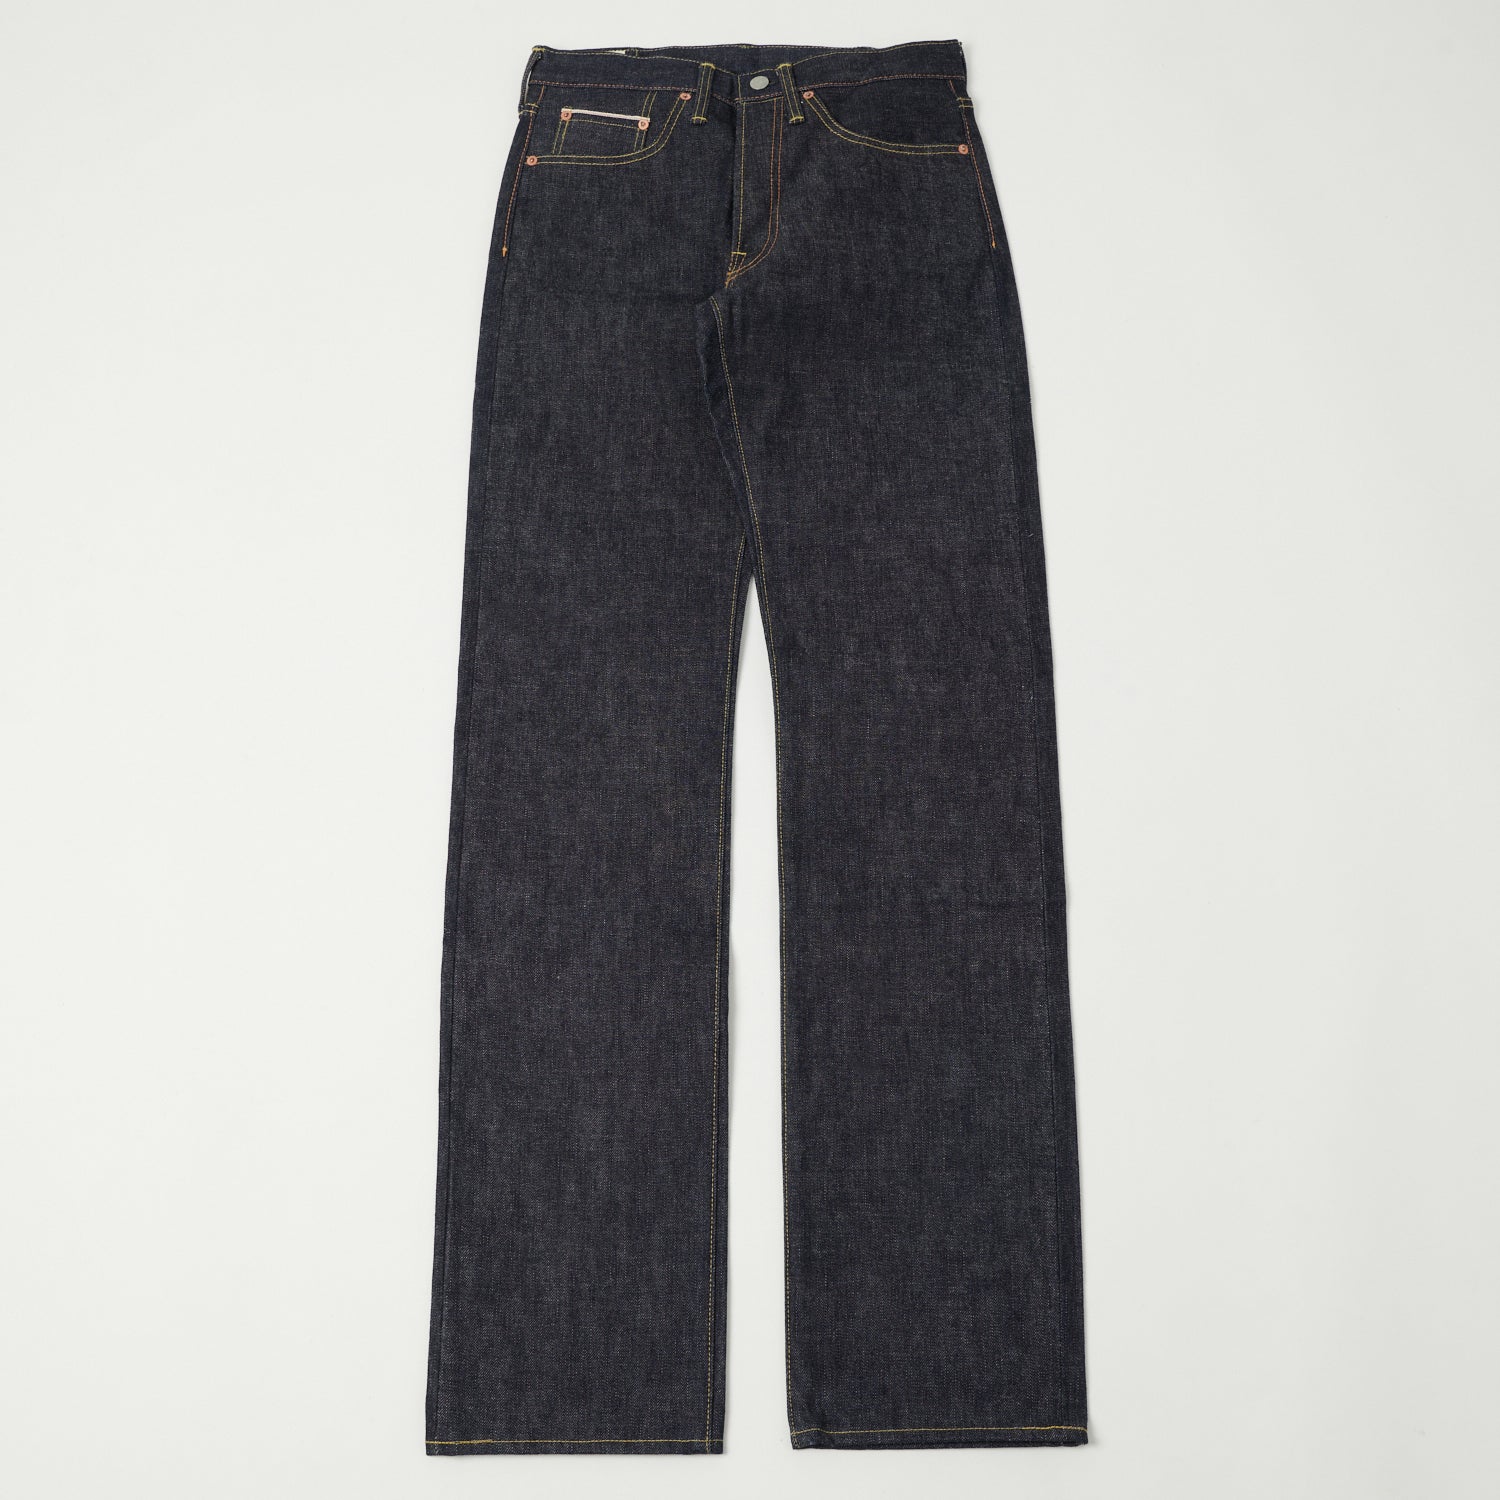 Studio D'artisan D1580 18.5oz Slim Straight Jeans - Raw | SON OF A STAG